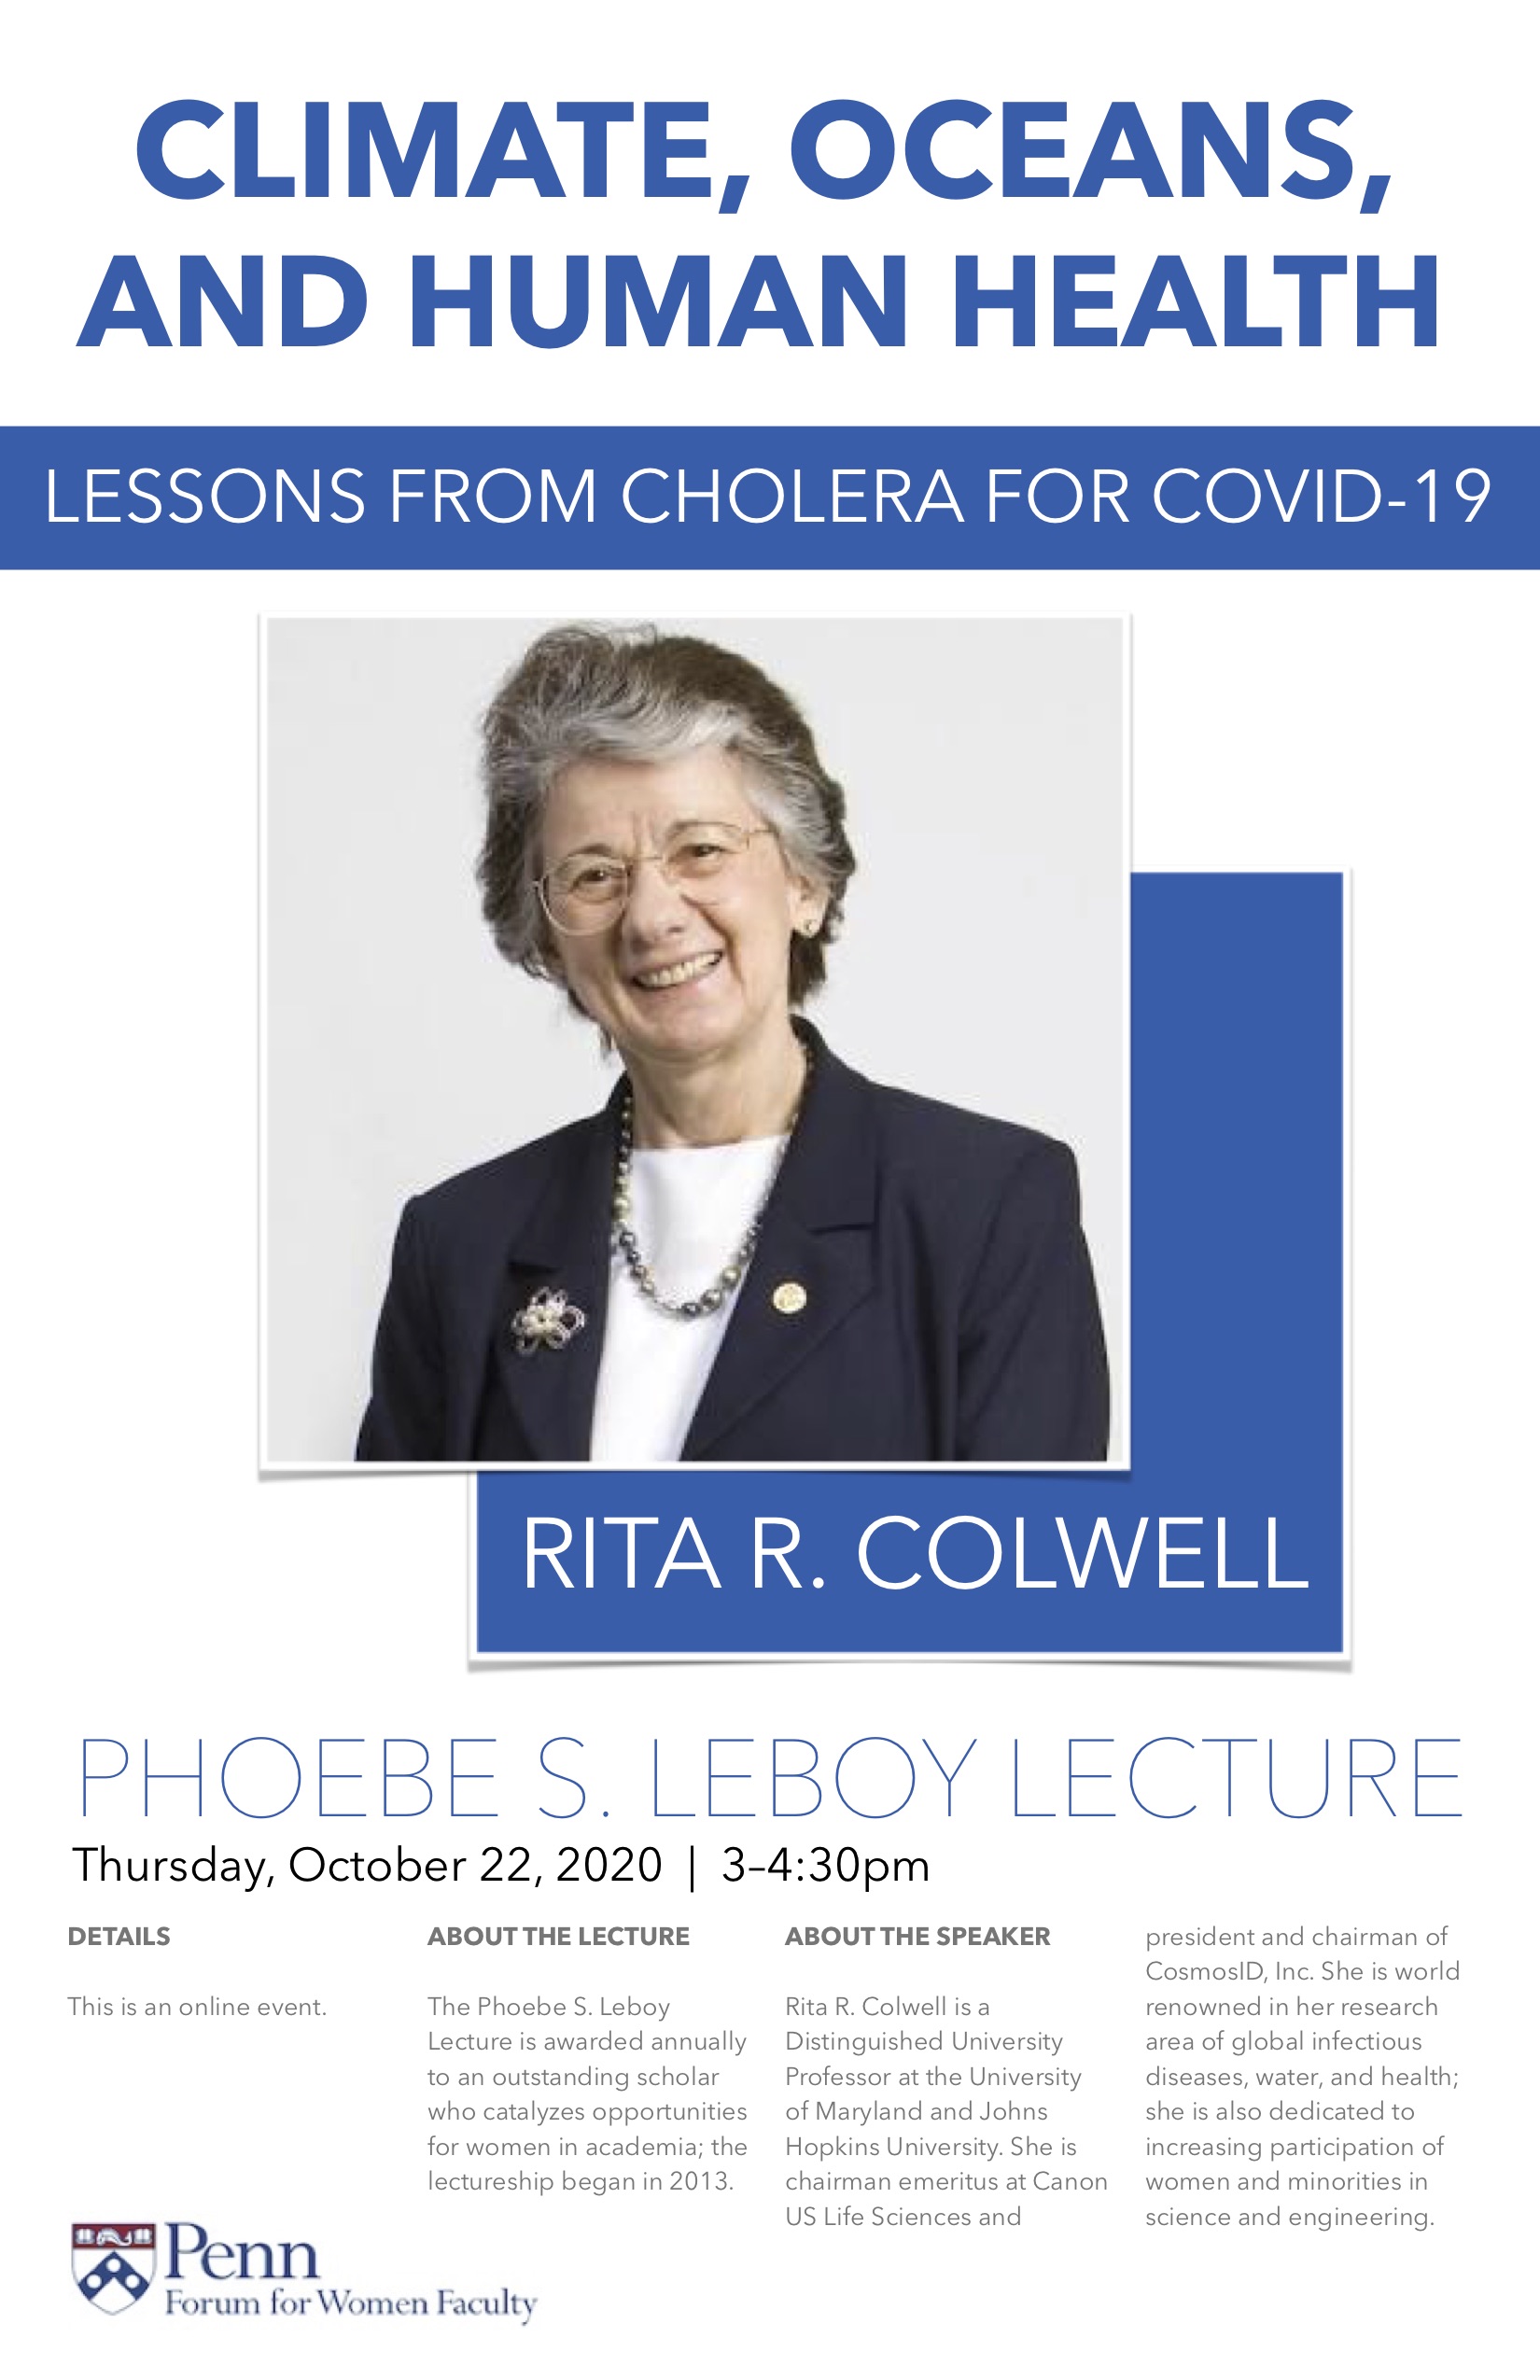 Rita Colwell Poster